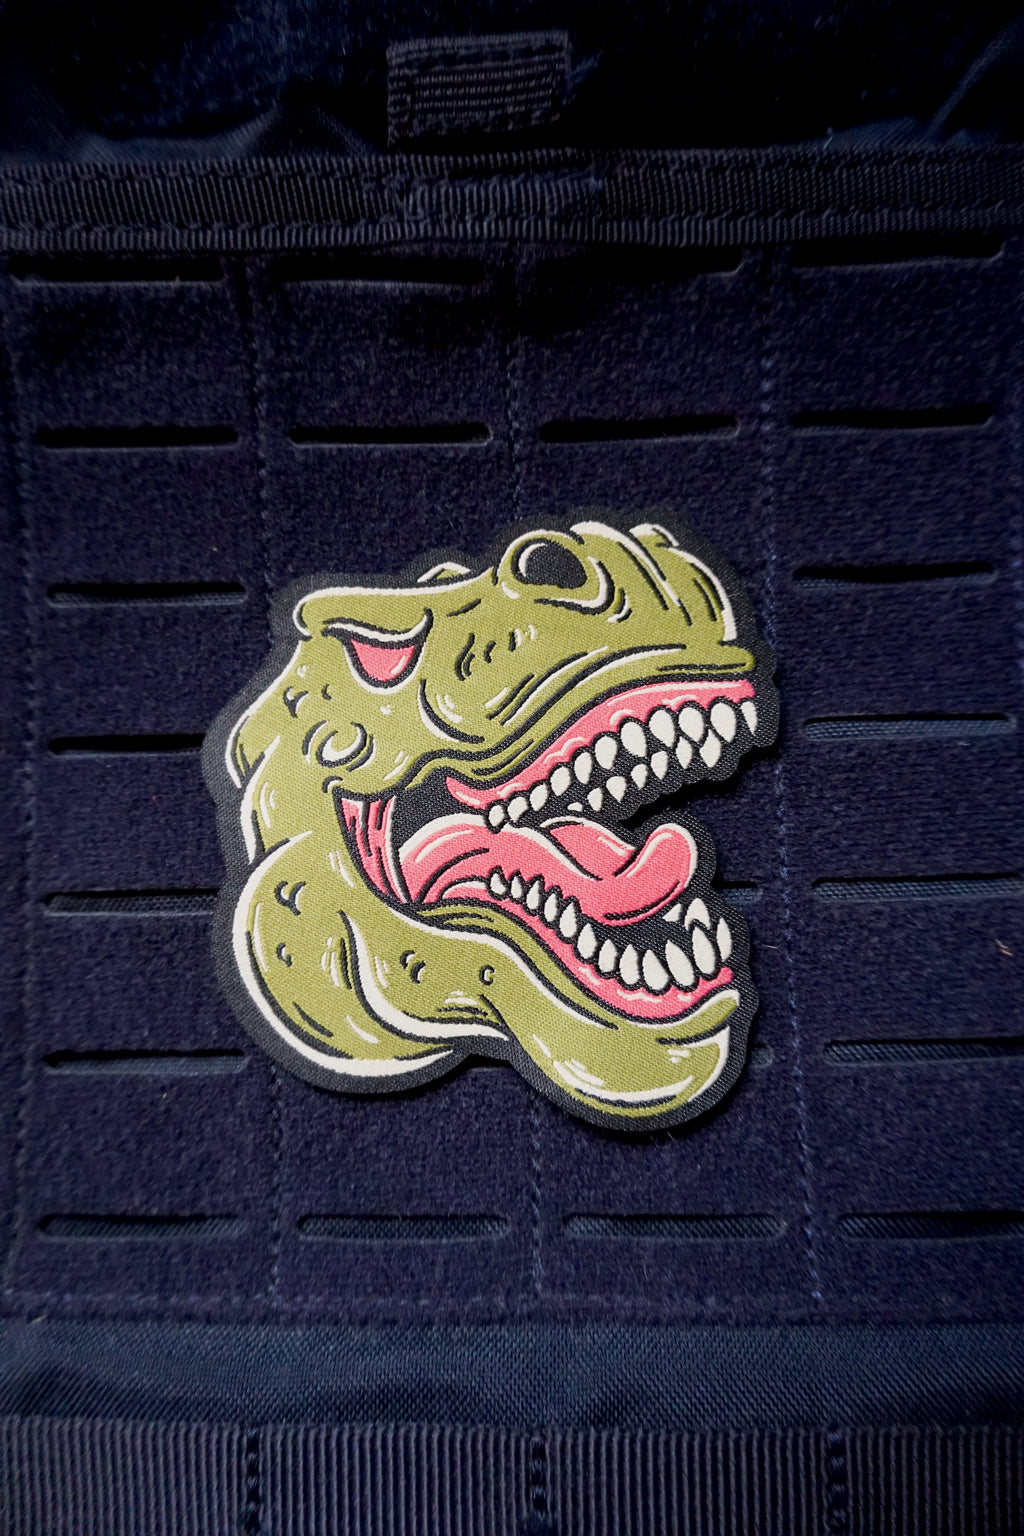 The T-Rex Patch